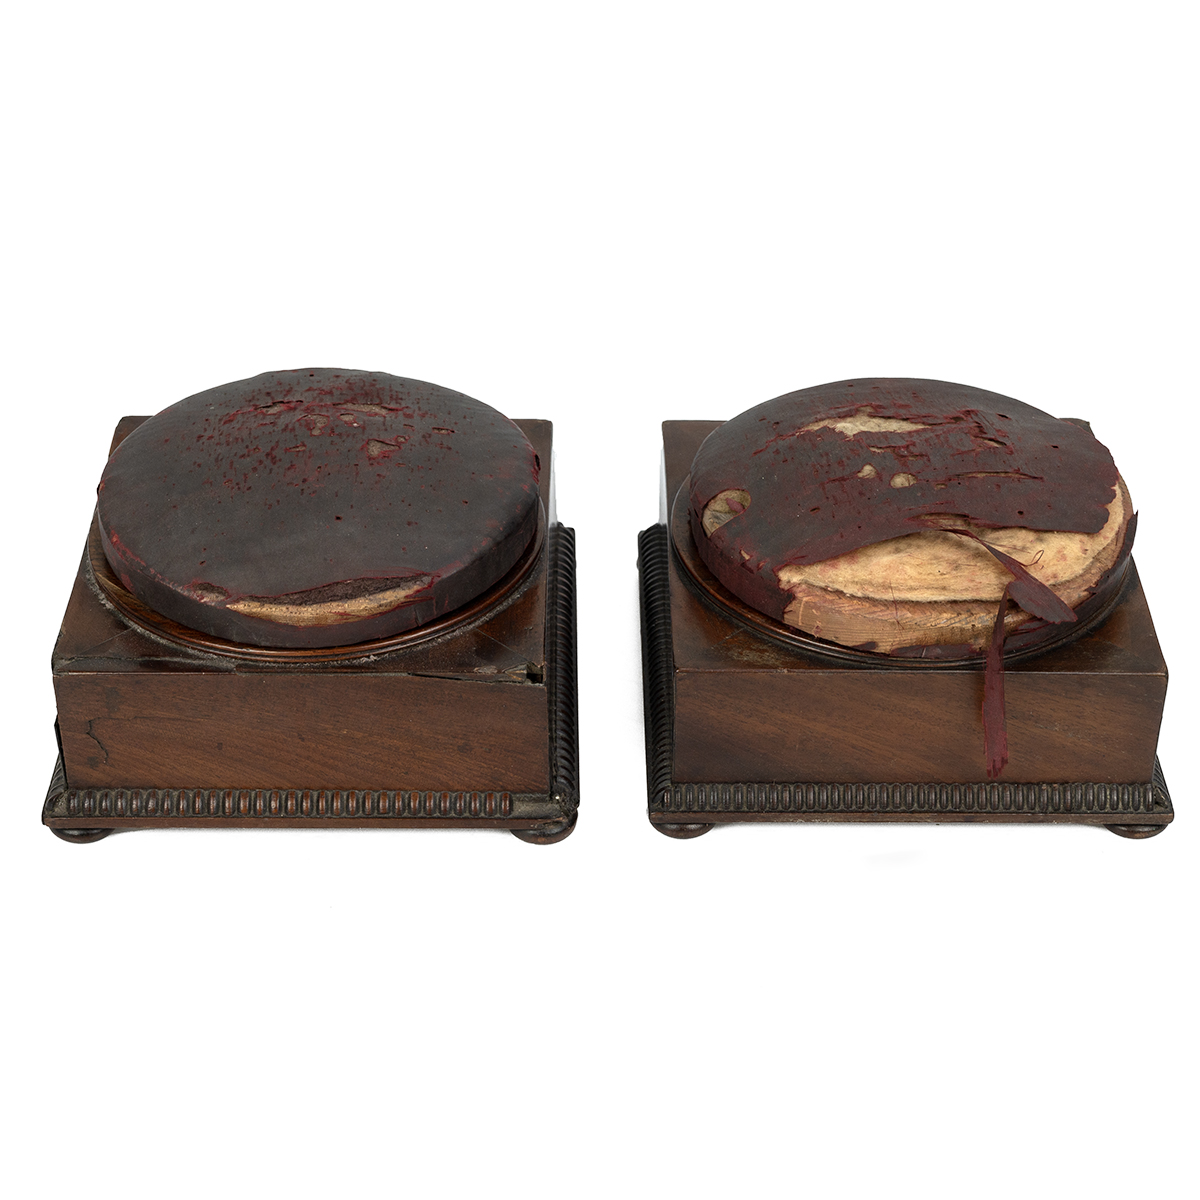 Pair of 19th century tailor's sewing boxes with pincushion tops. (2) - Image 3 of 3